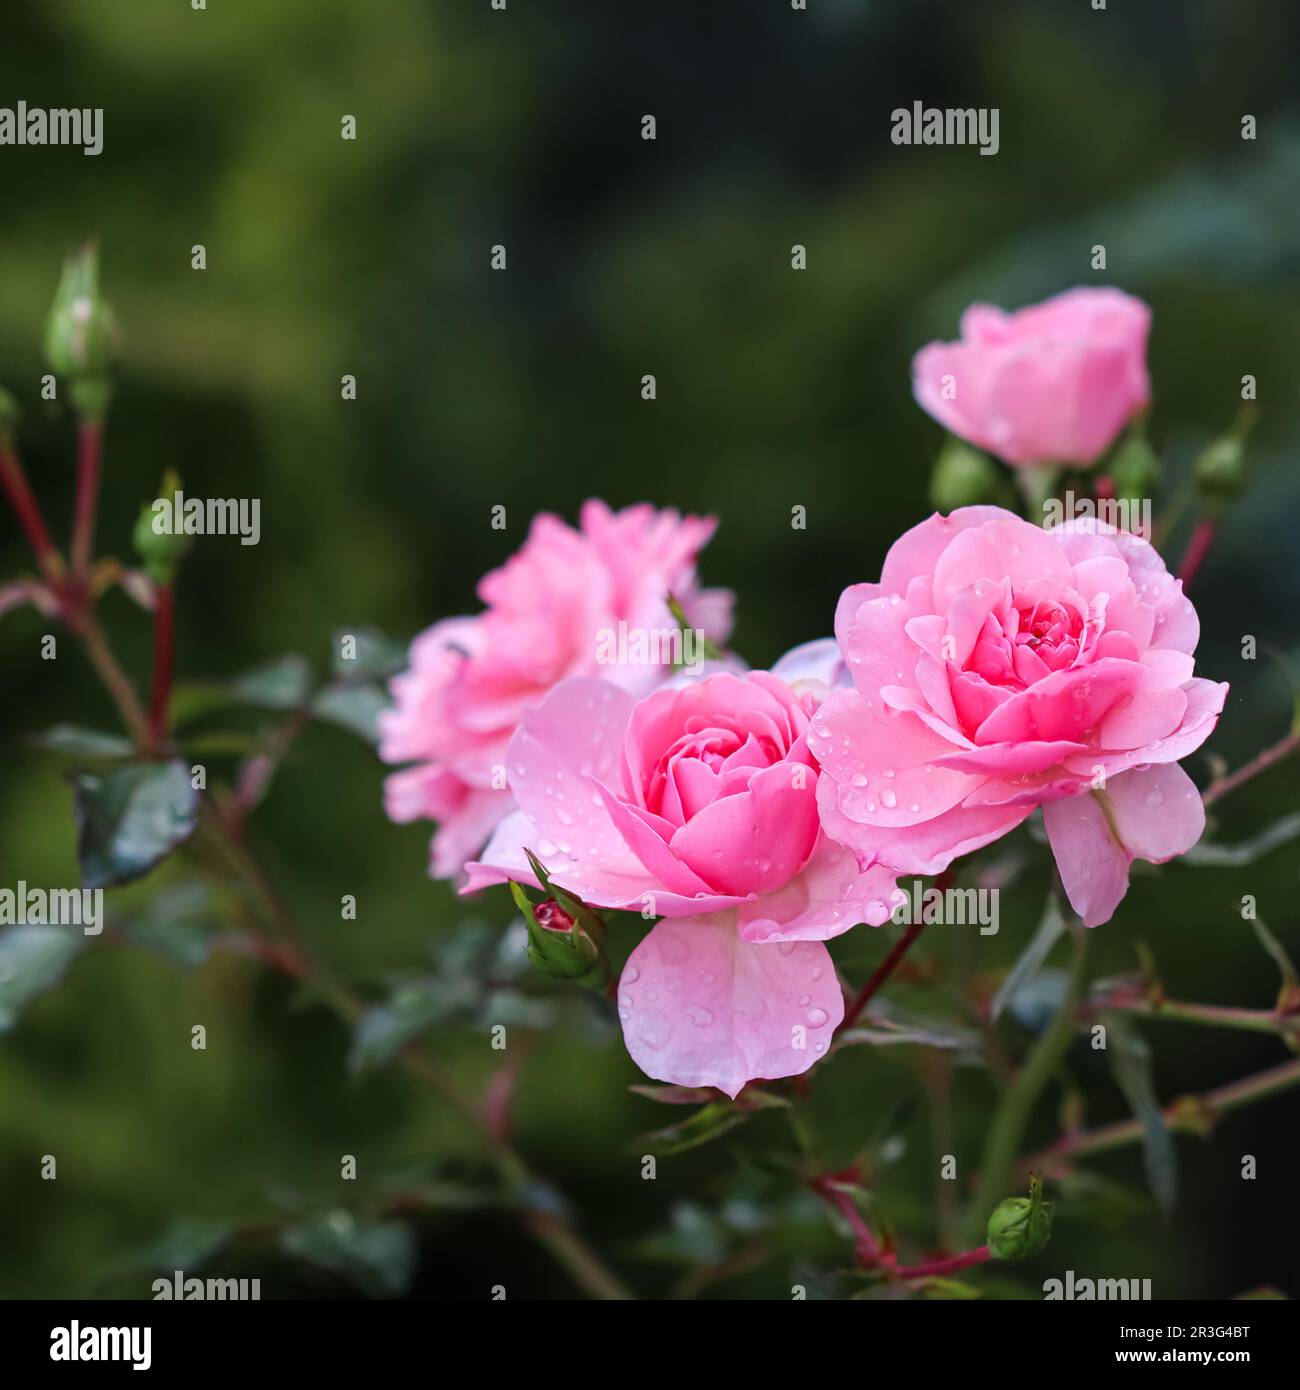 Beautiful pink roses with dew drops in the garden Stock Photo